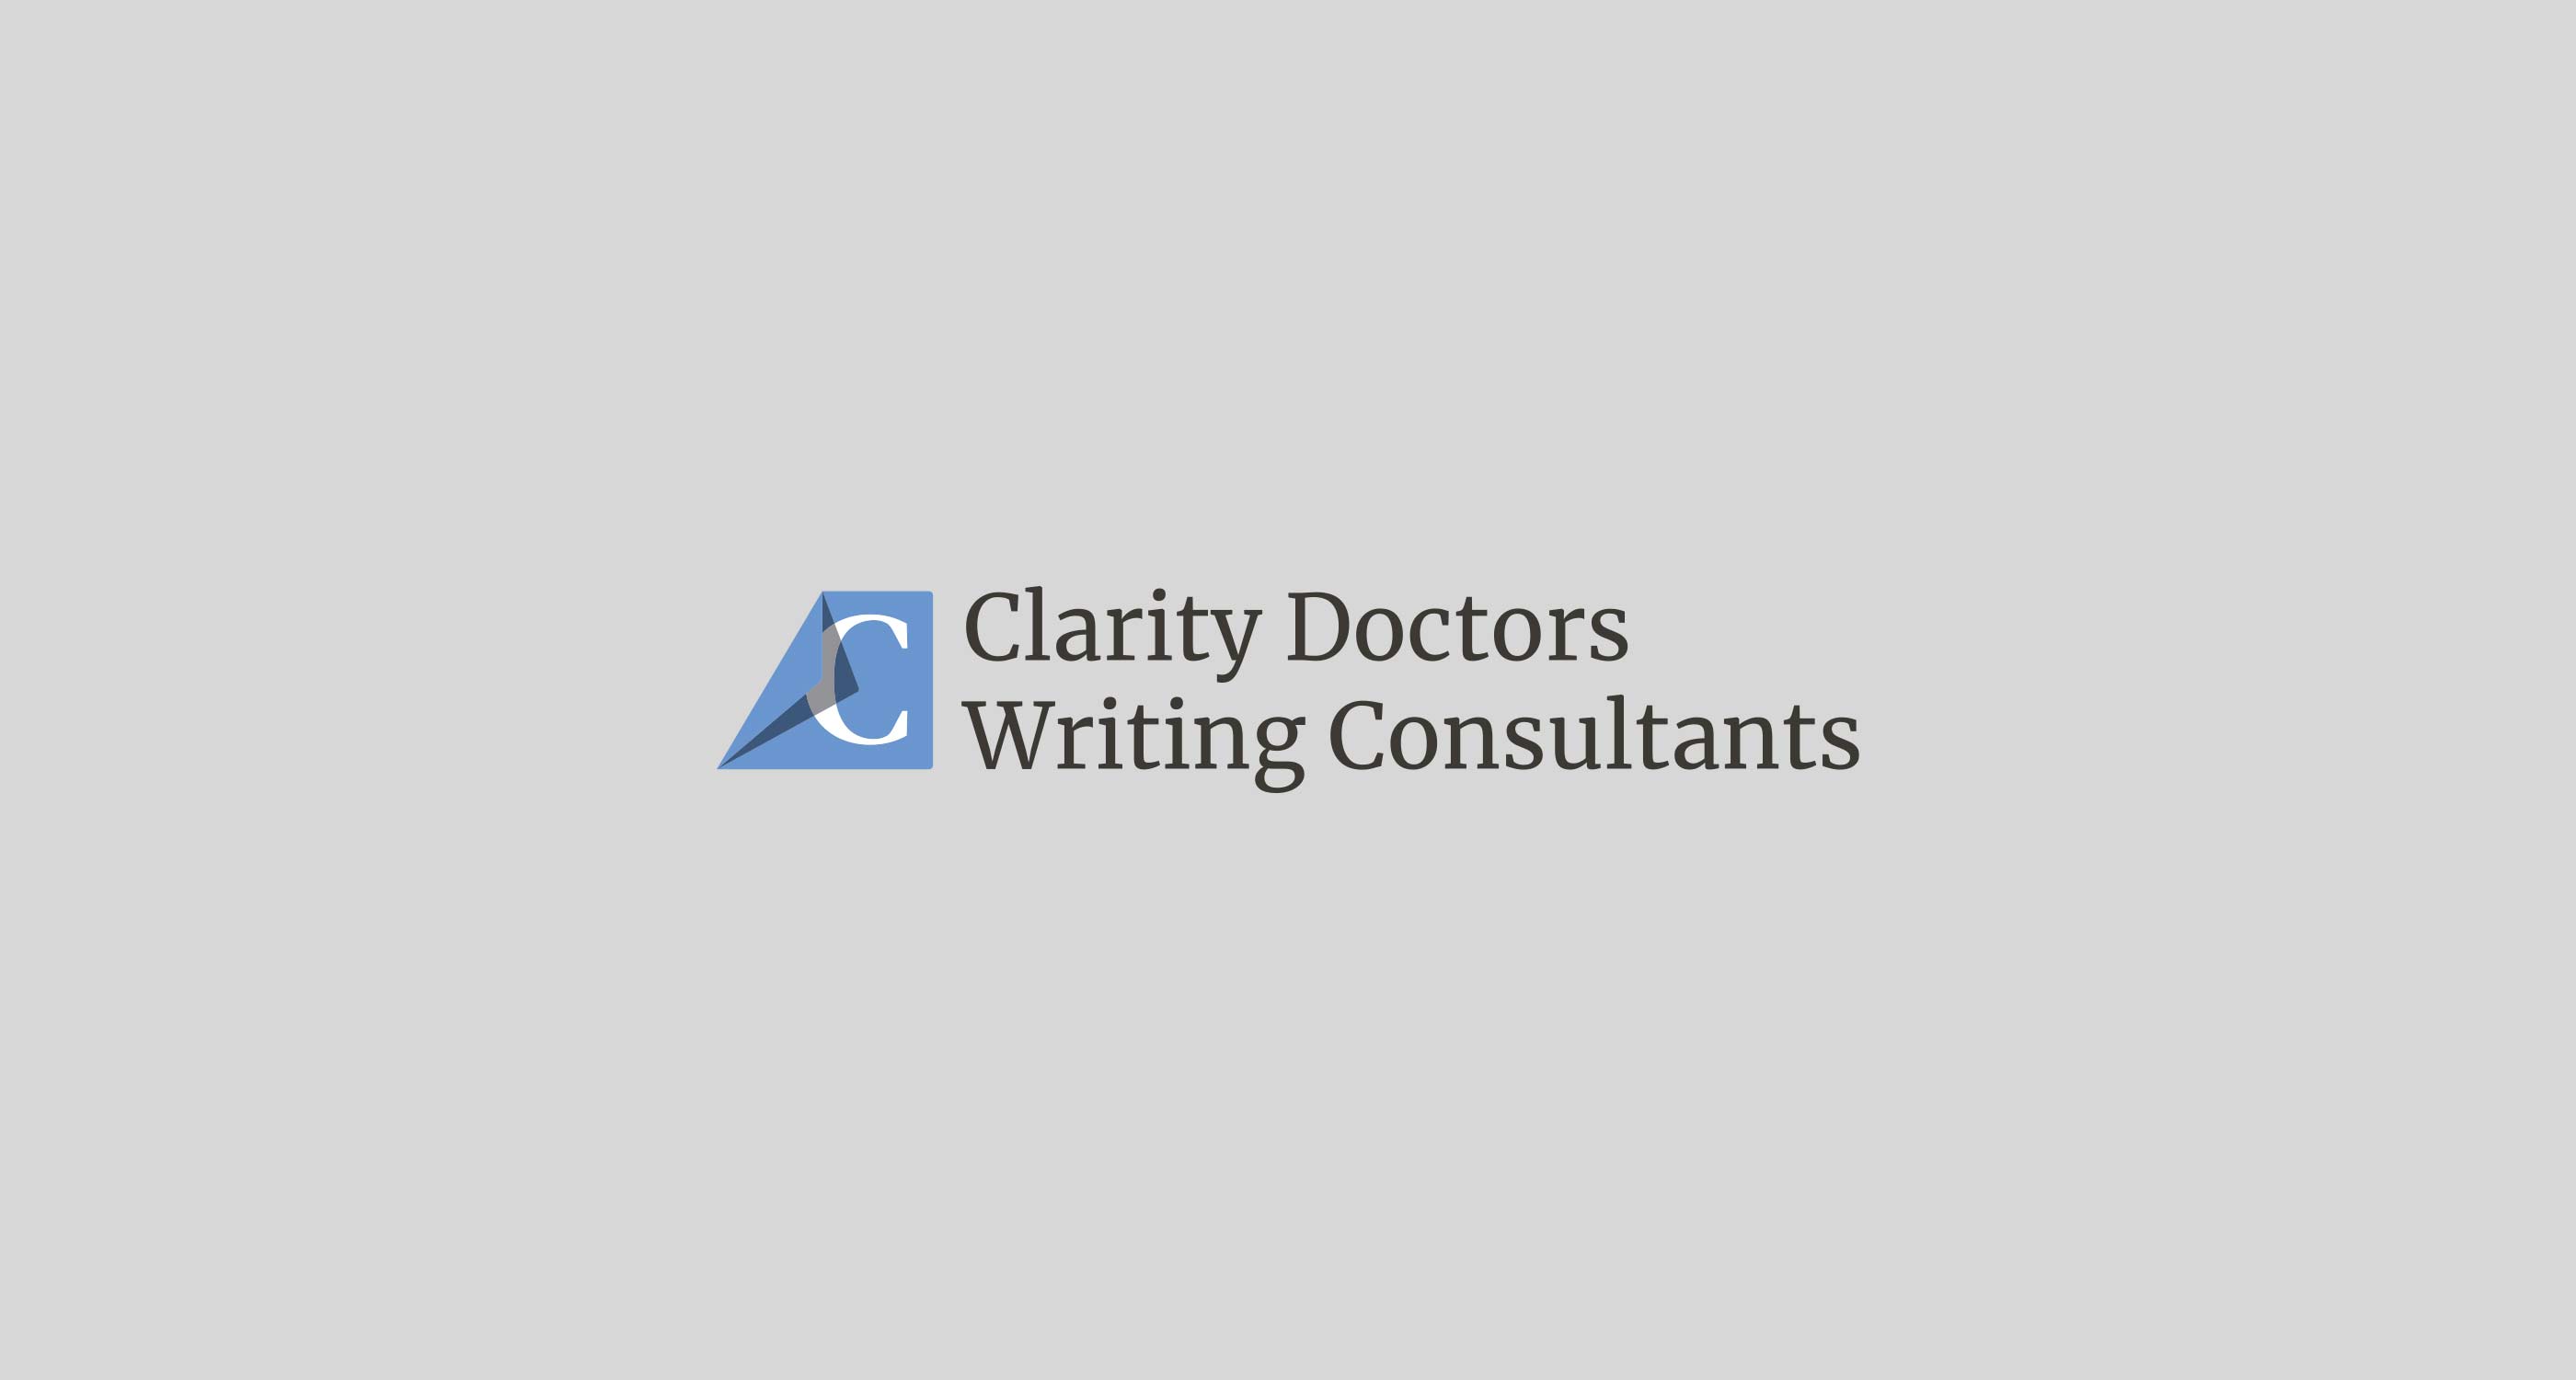 Clarity Doctors Writing Consultants Logo on a Grey Background by Karbon Branding